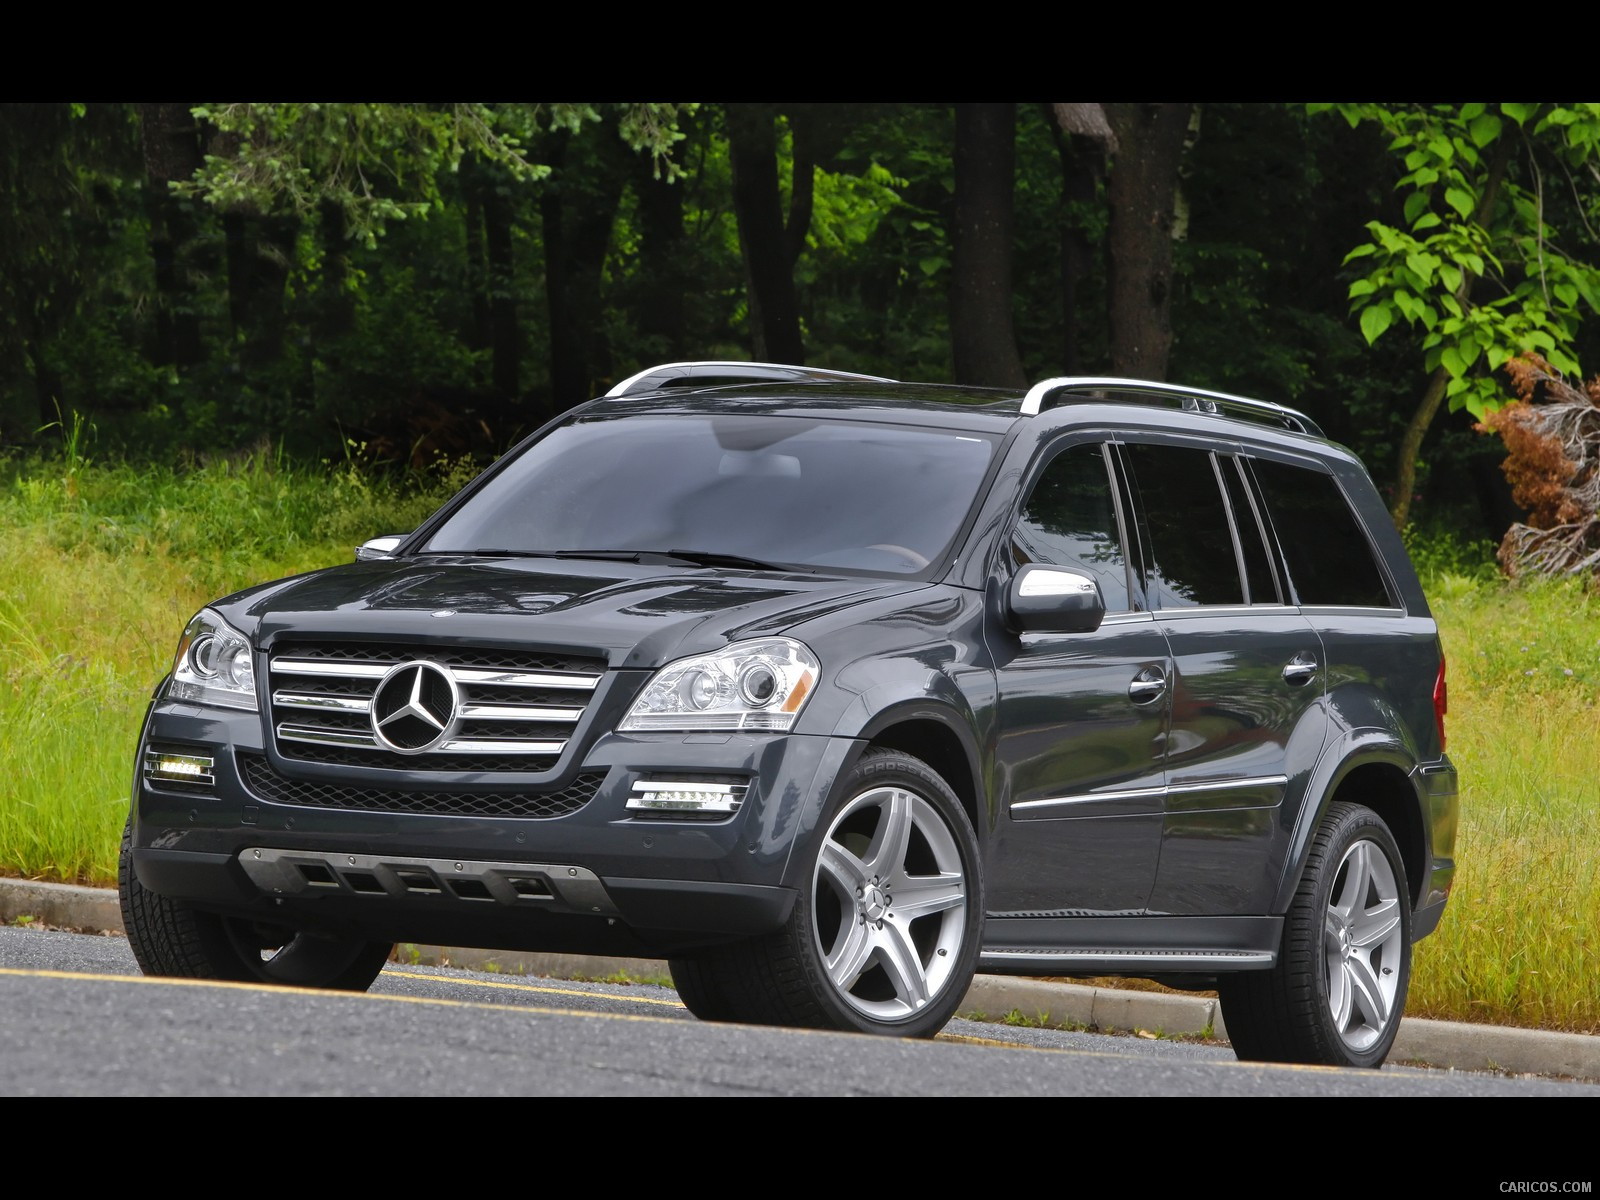 2010 Mercedes-Benz GL550 - Front, #48 of 112